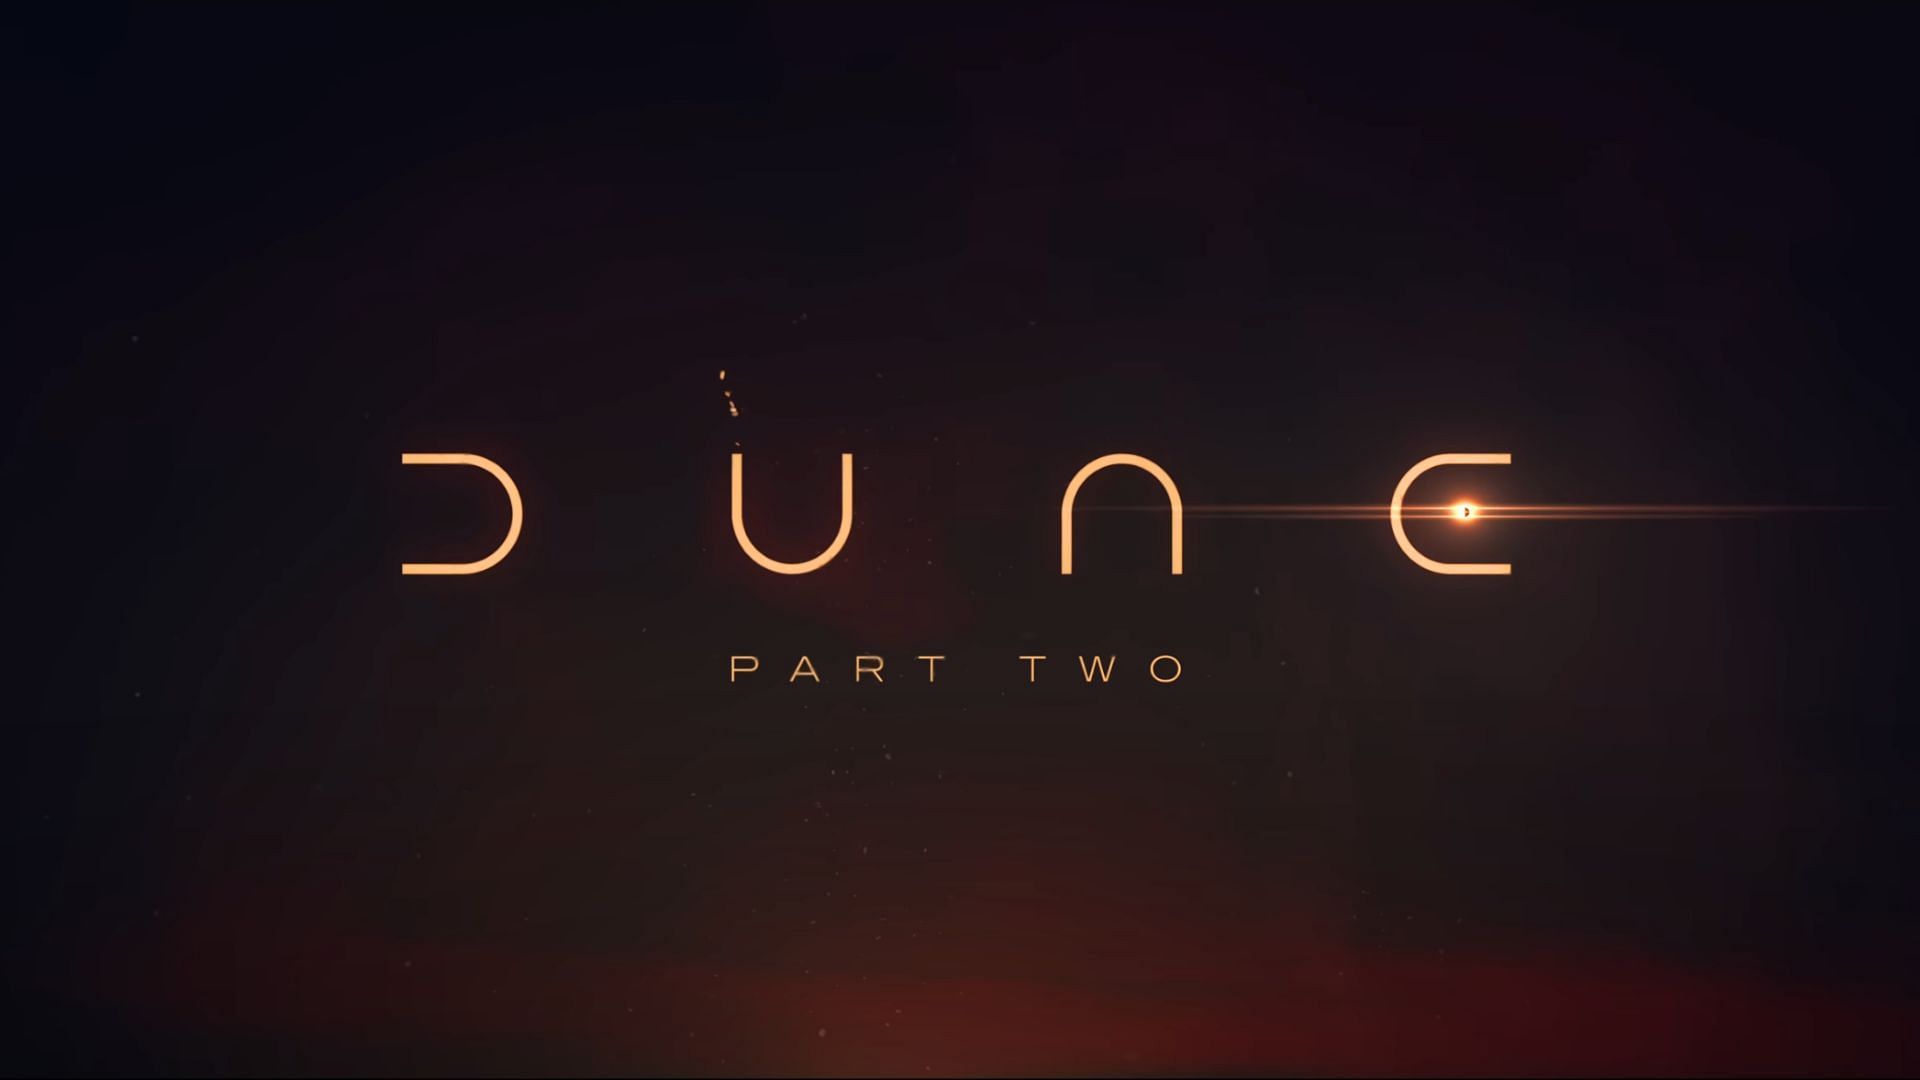 Dune: Part Two has a long runtime. (Image via WB)